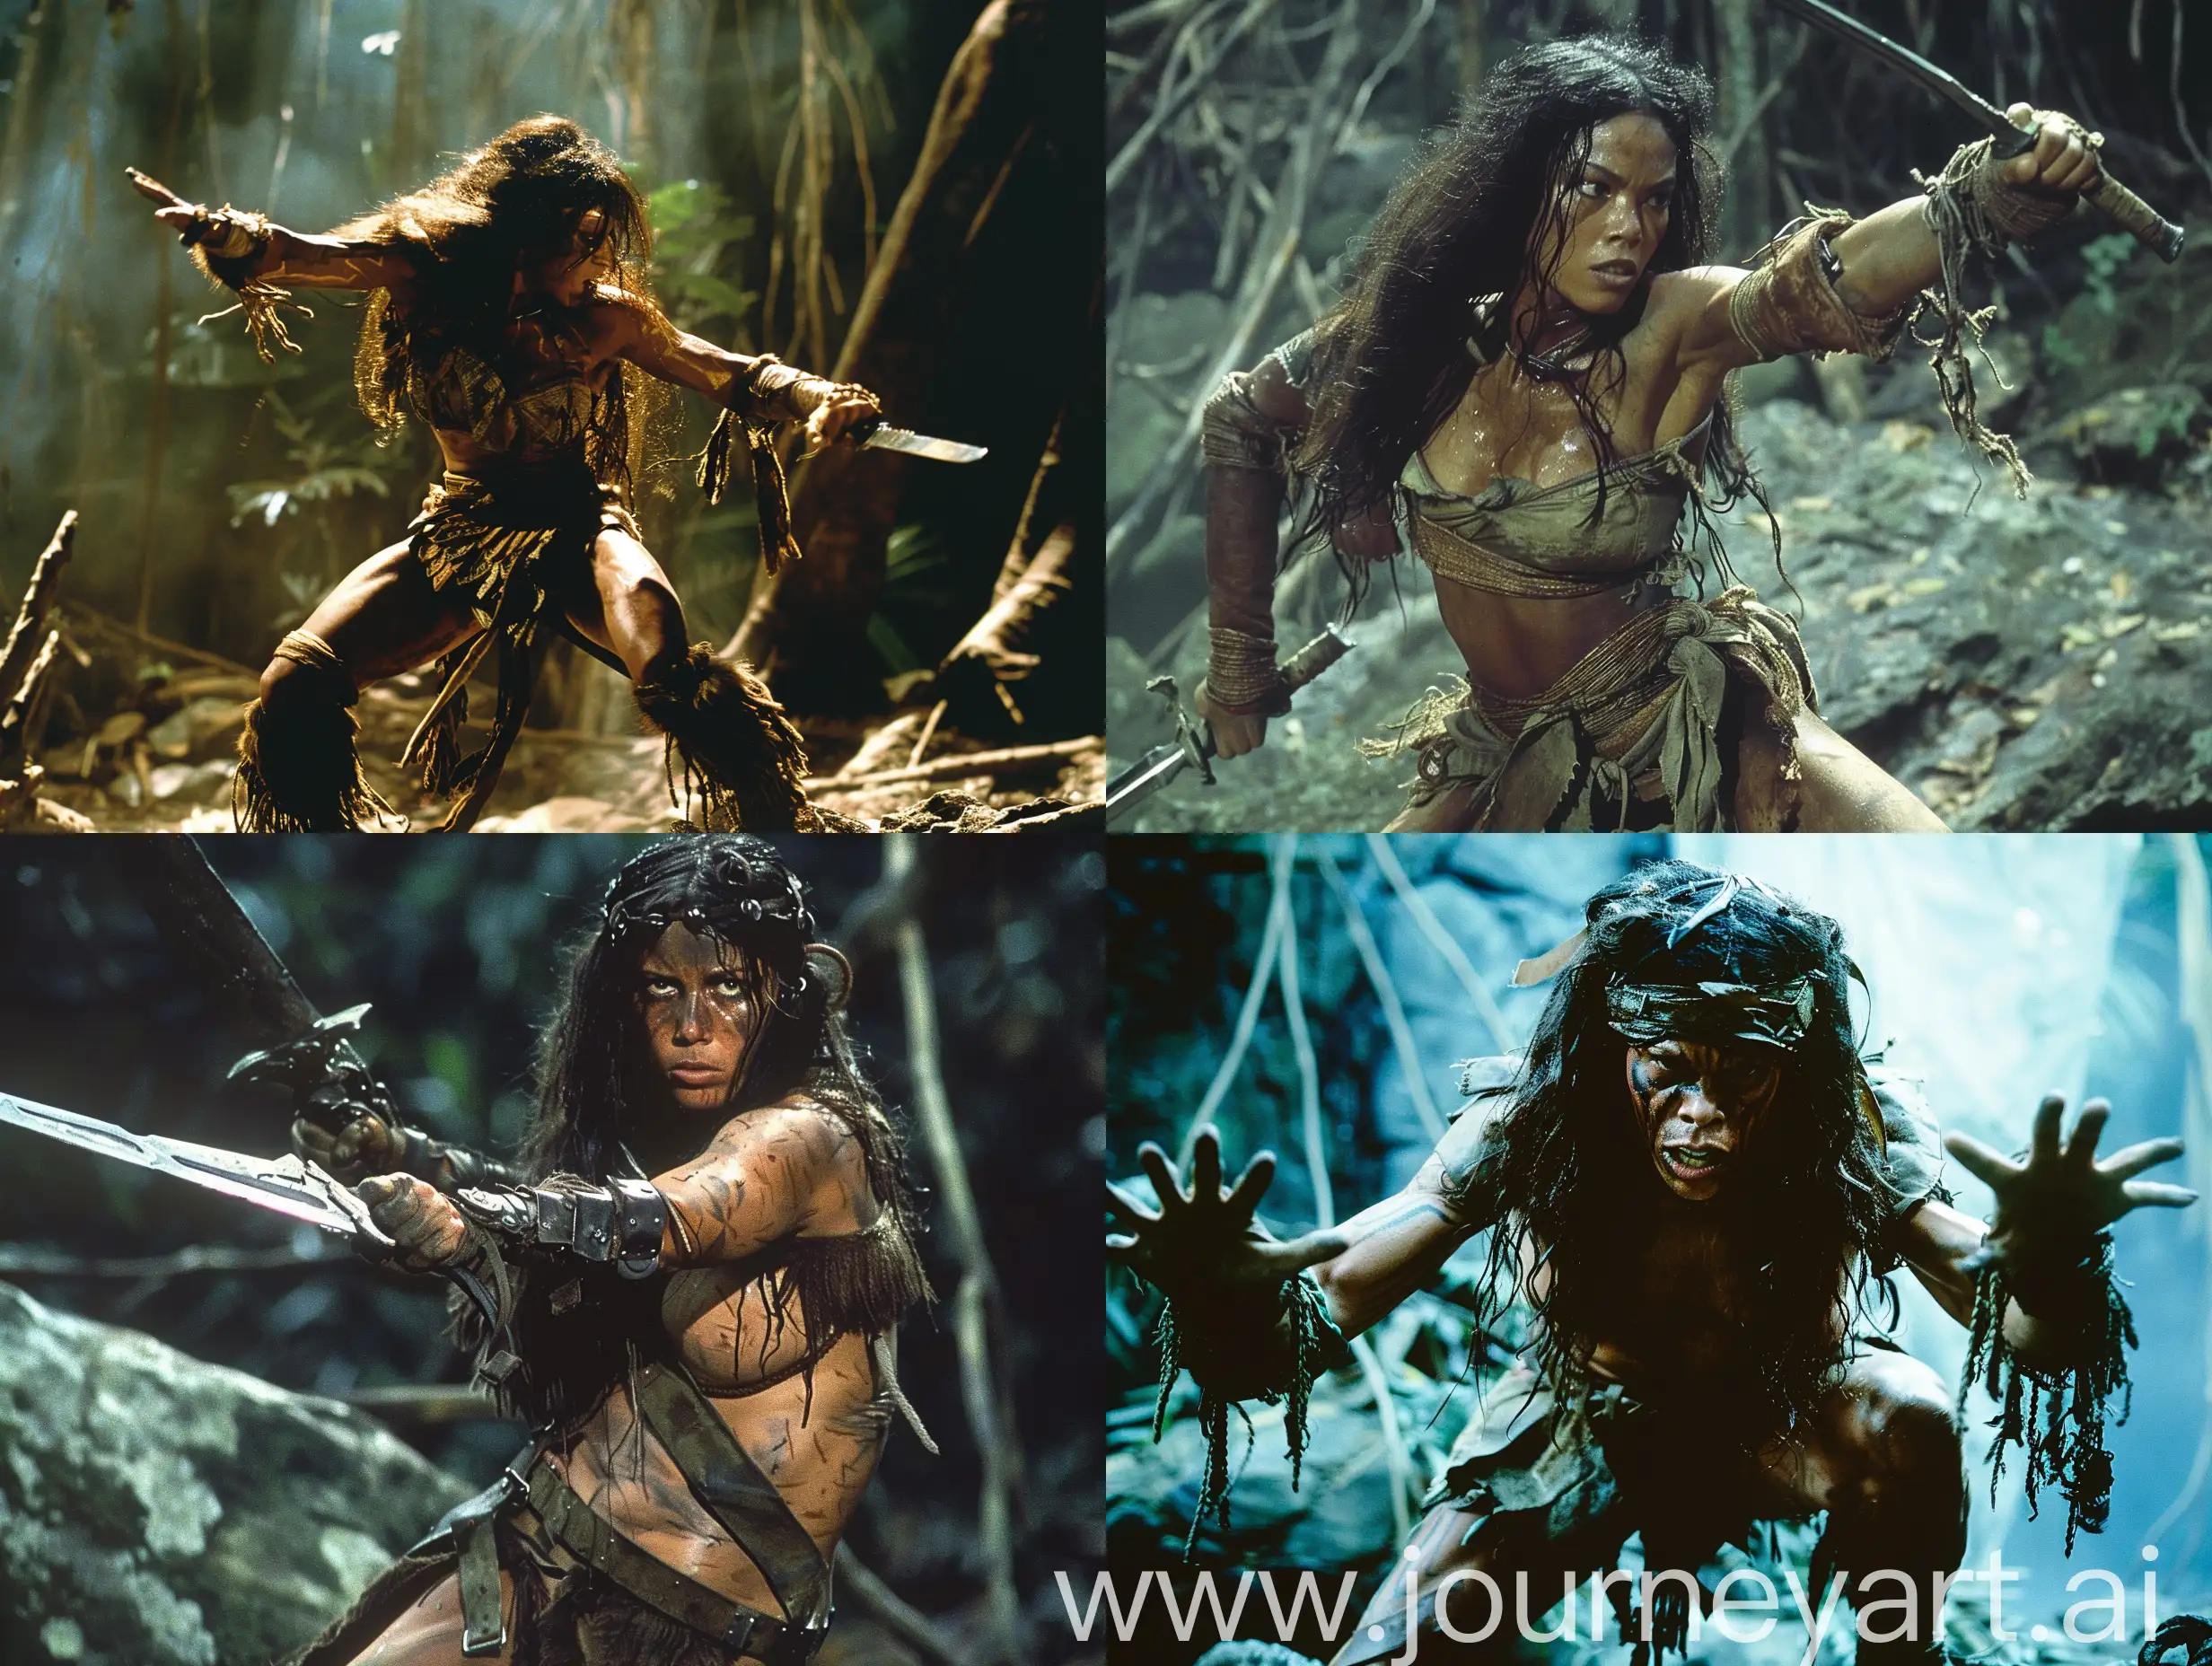 feral female barbarian, dymanic pose. set piece action scene from movie in style of Aguirre, the Wrath of God (1972), Jurassic Park (1993), Predator (1987), Apocalypse Now (1979), Jumanji: Welcome to the Jungle (2017), King Kong (2005), The Emerald Forest (1985), Romancing the Stone (1984), Death in the Garden (1956)